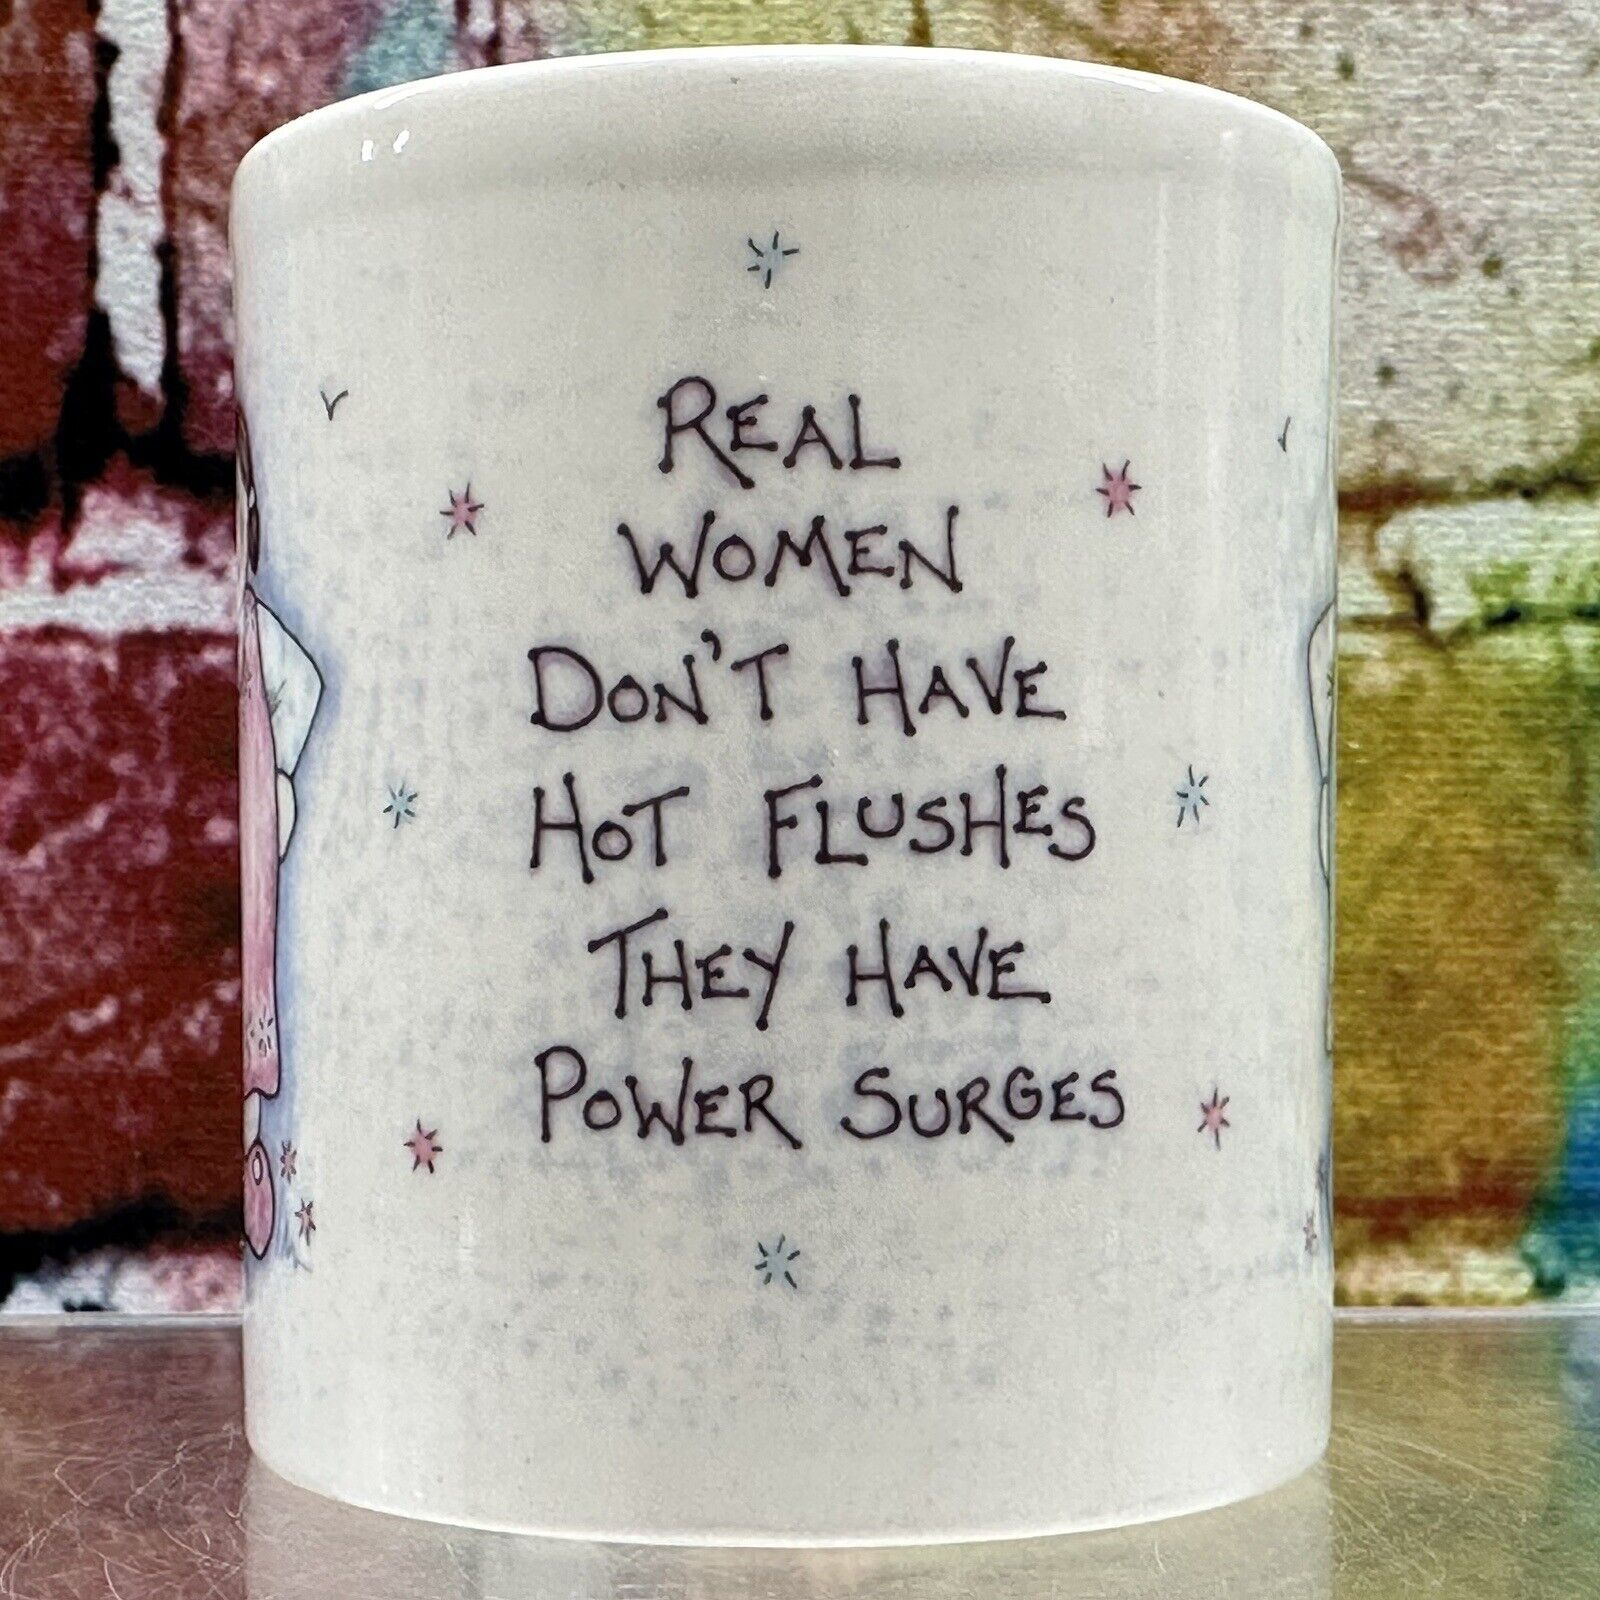 REAL WOMEN DON'T HAVE HOT FLUSHES THEY HAVE POWER SURGES Coffee Mug Menopause